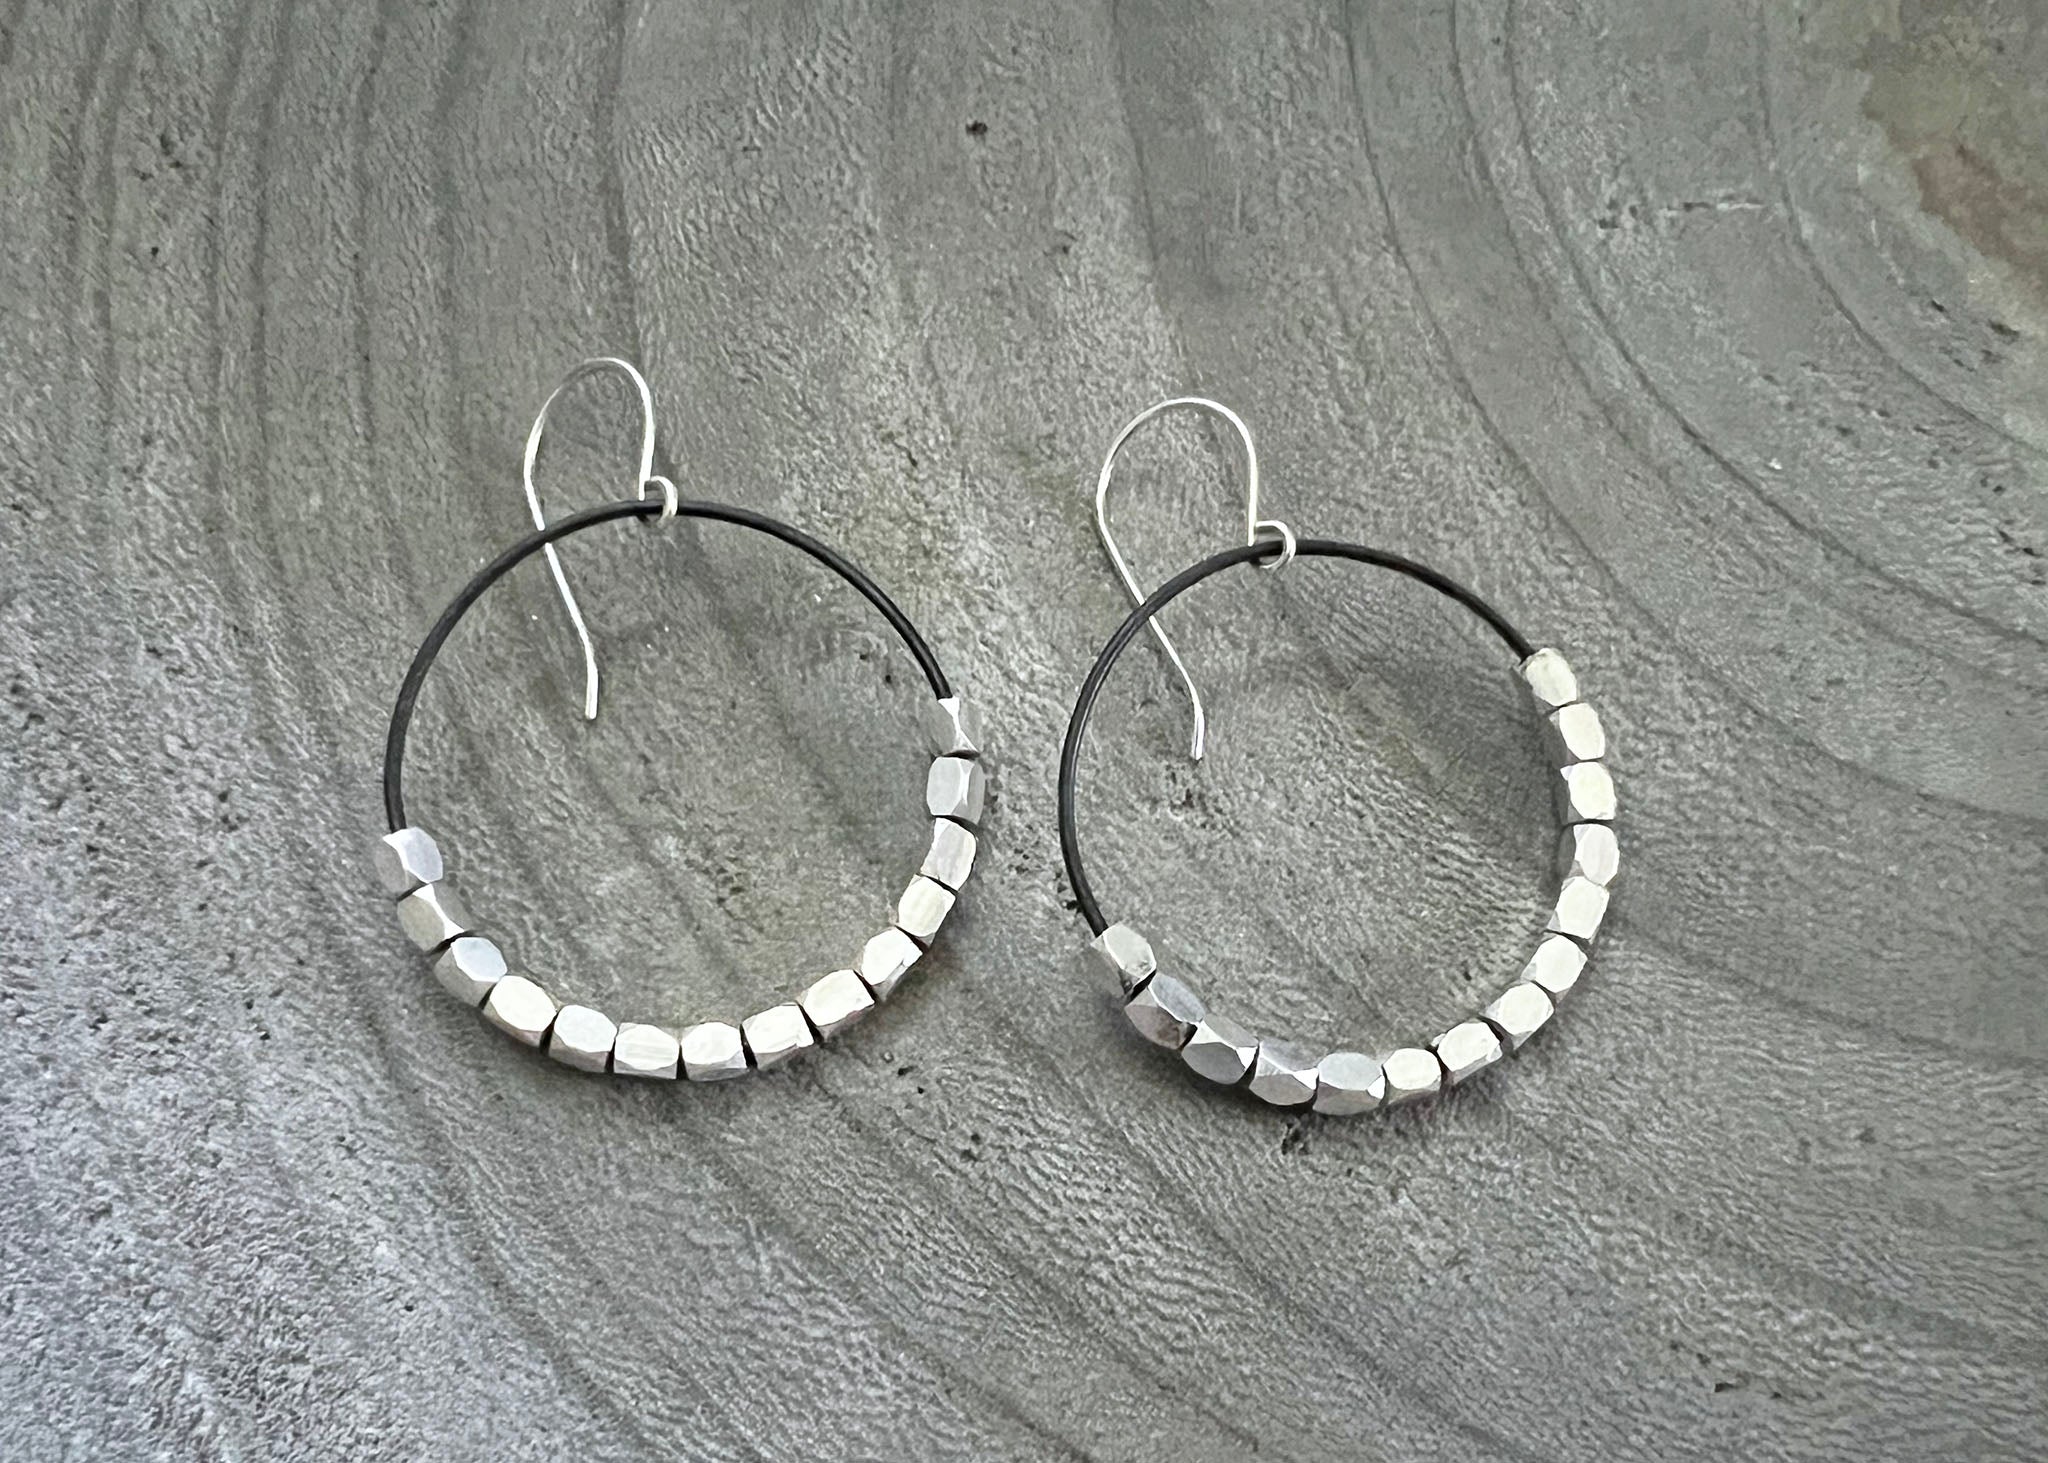 Buy Hoop Earrings,Silver Circle Dangle Earrings,Infinity Circle, dangle  drop Earrings,Ethnic Earrings,Brass jewelry, Gypsy gift for her at Amazon.in